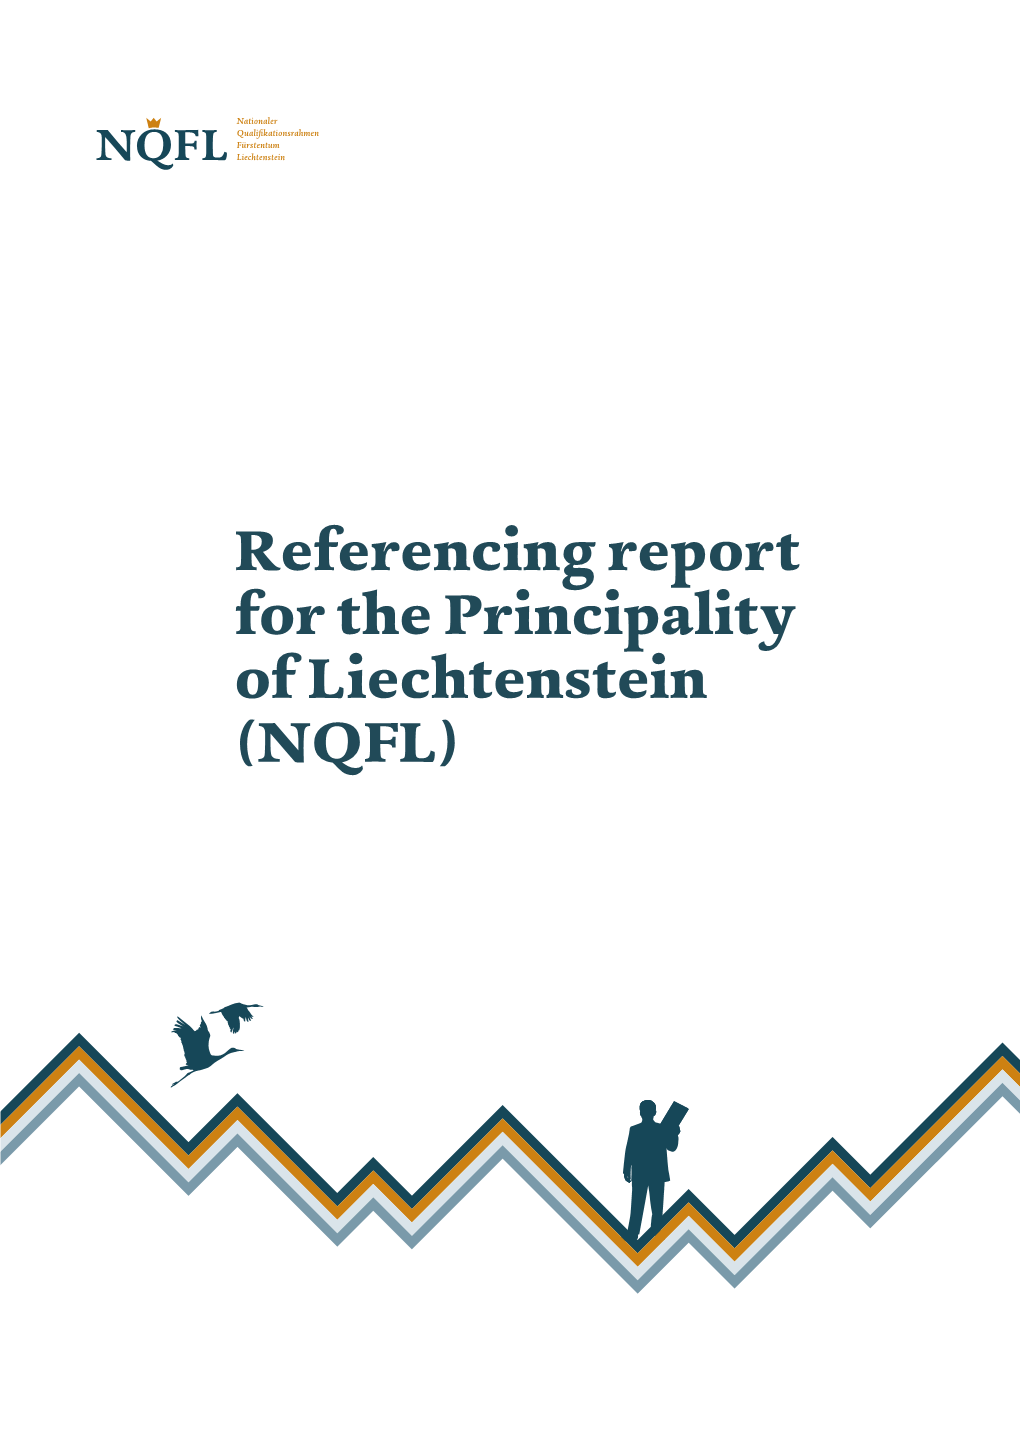 Referencing Report for the Principality of Liechtenstein (NQFL) Contents